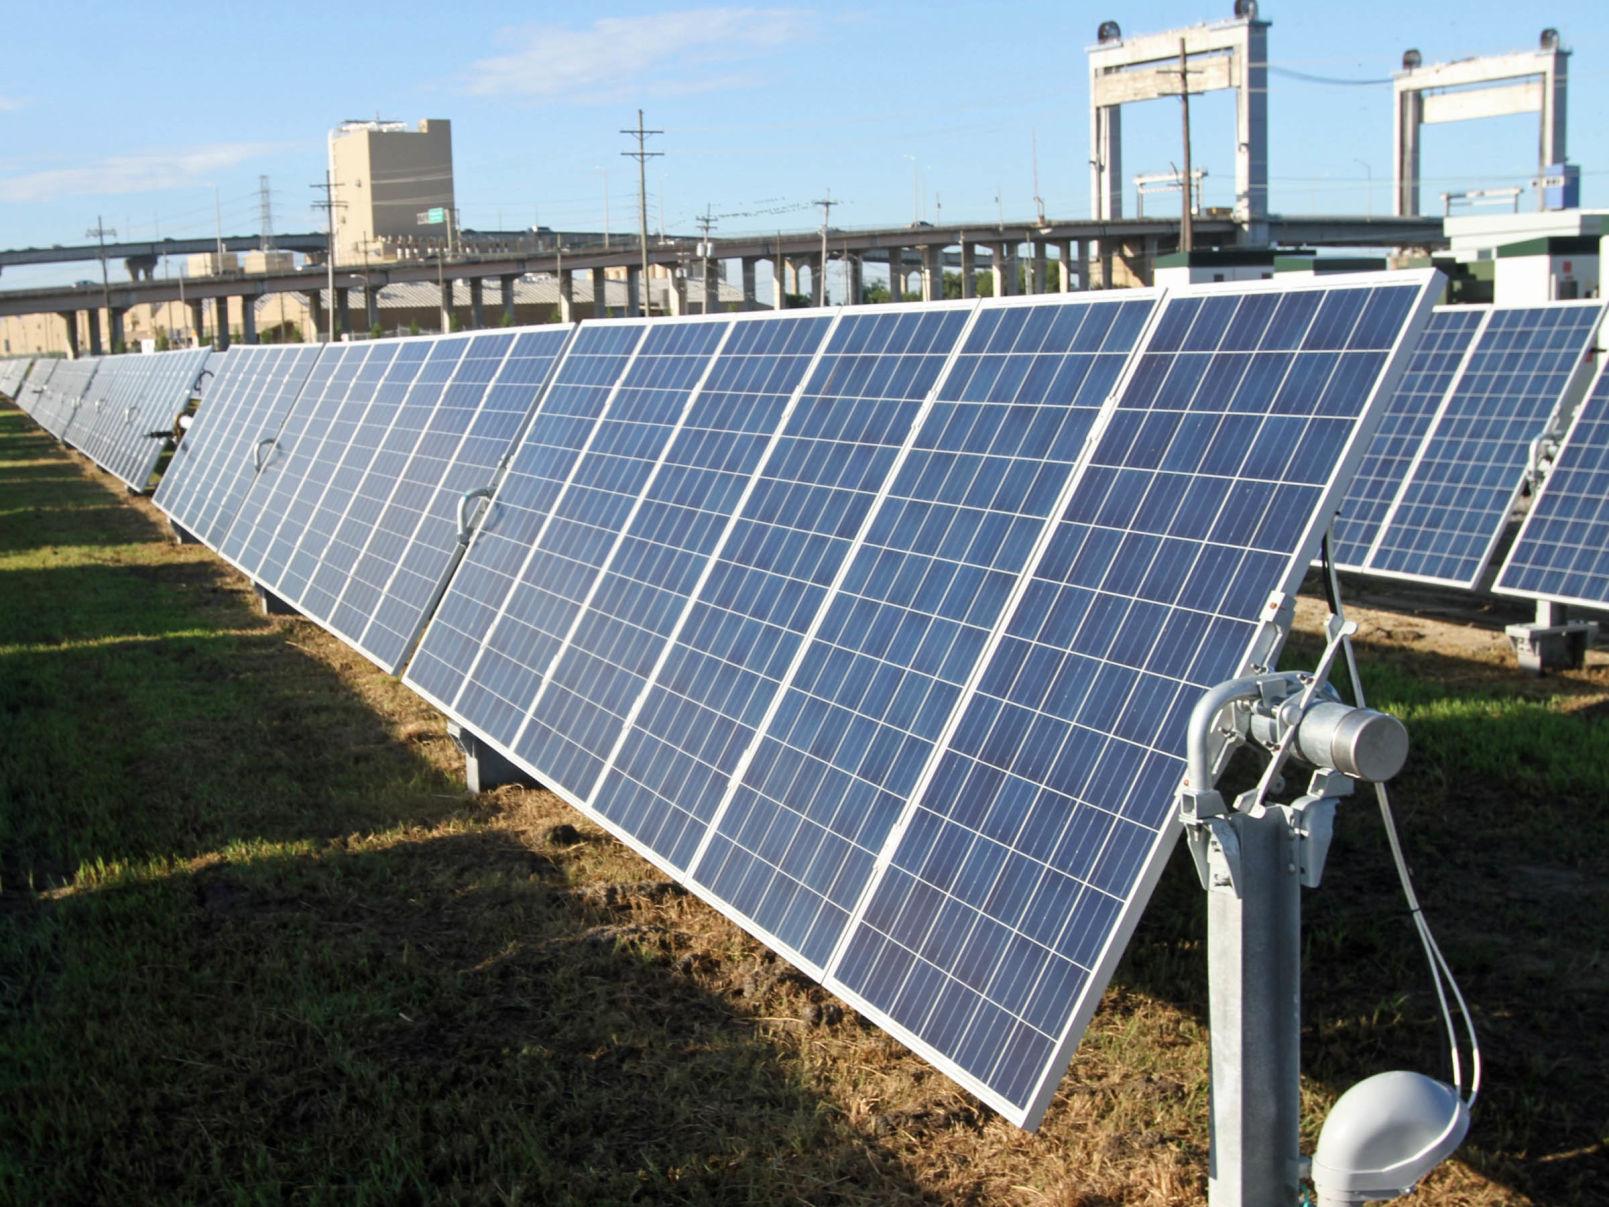 Maryland Inno: UMMS partners with local company to create $25M solar energy farm in Baltimore